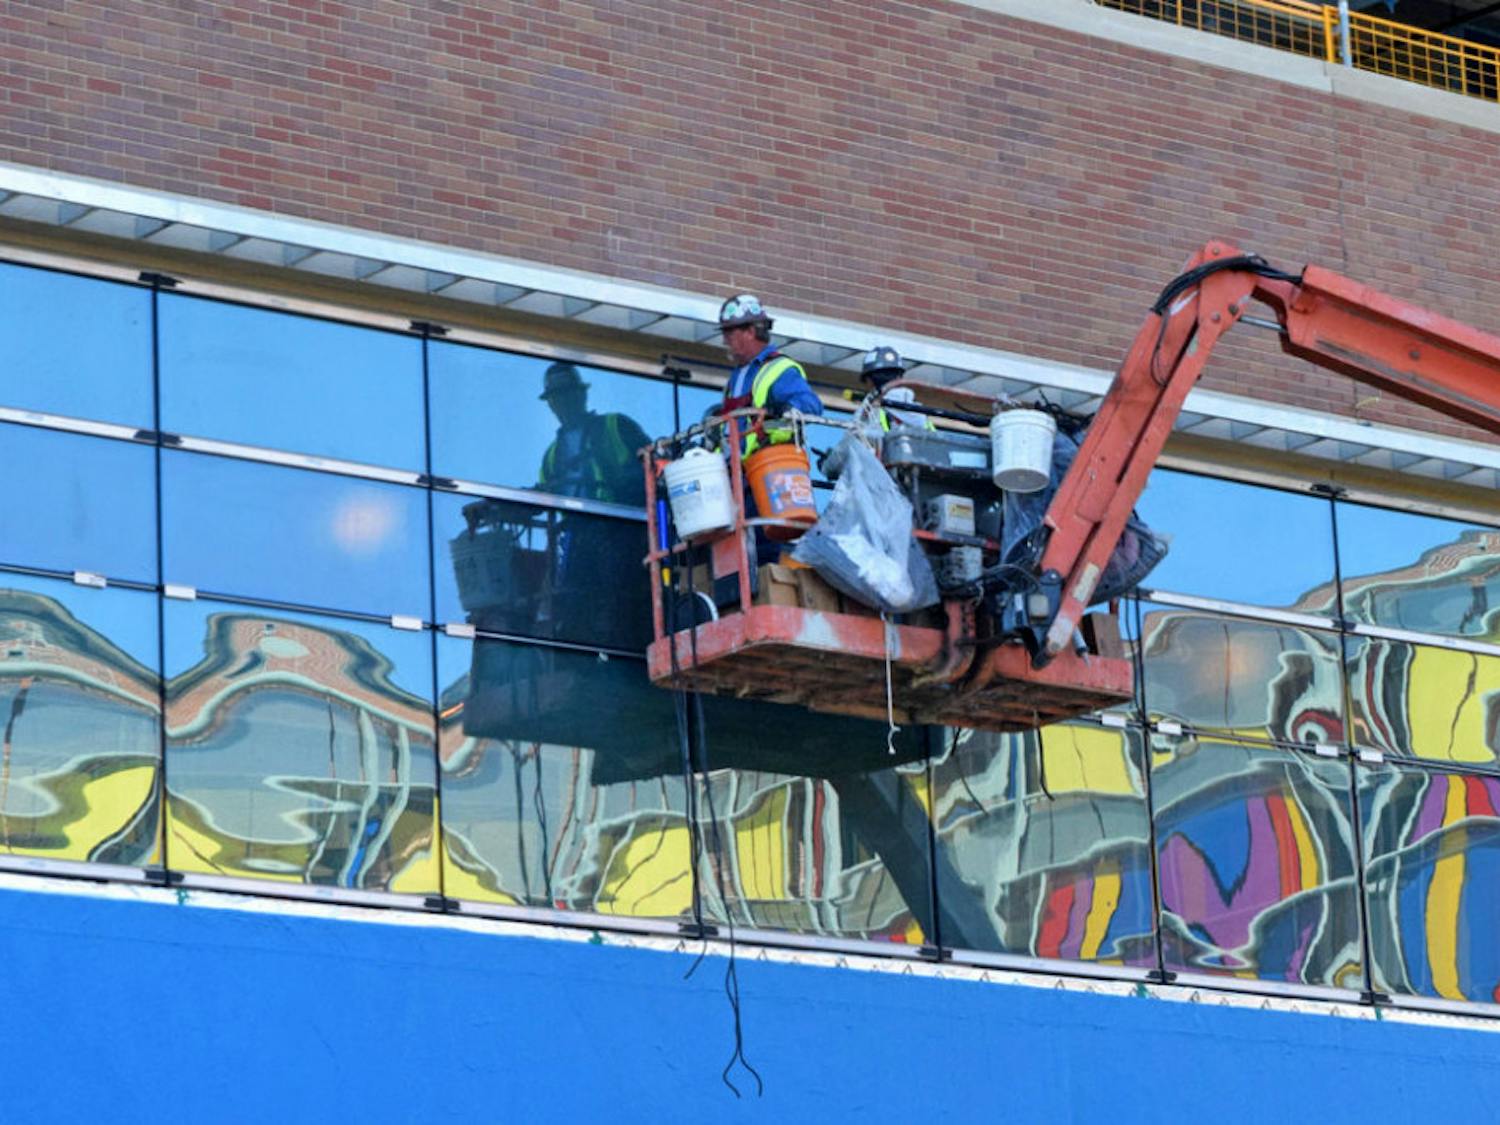 Construction workers fix window treatments on the new building of UF Health Shands Hospital on Wednesday. The children's hospital, across Archer Road, is reflected in the windows.